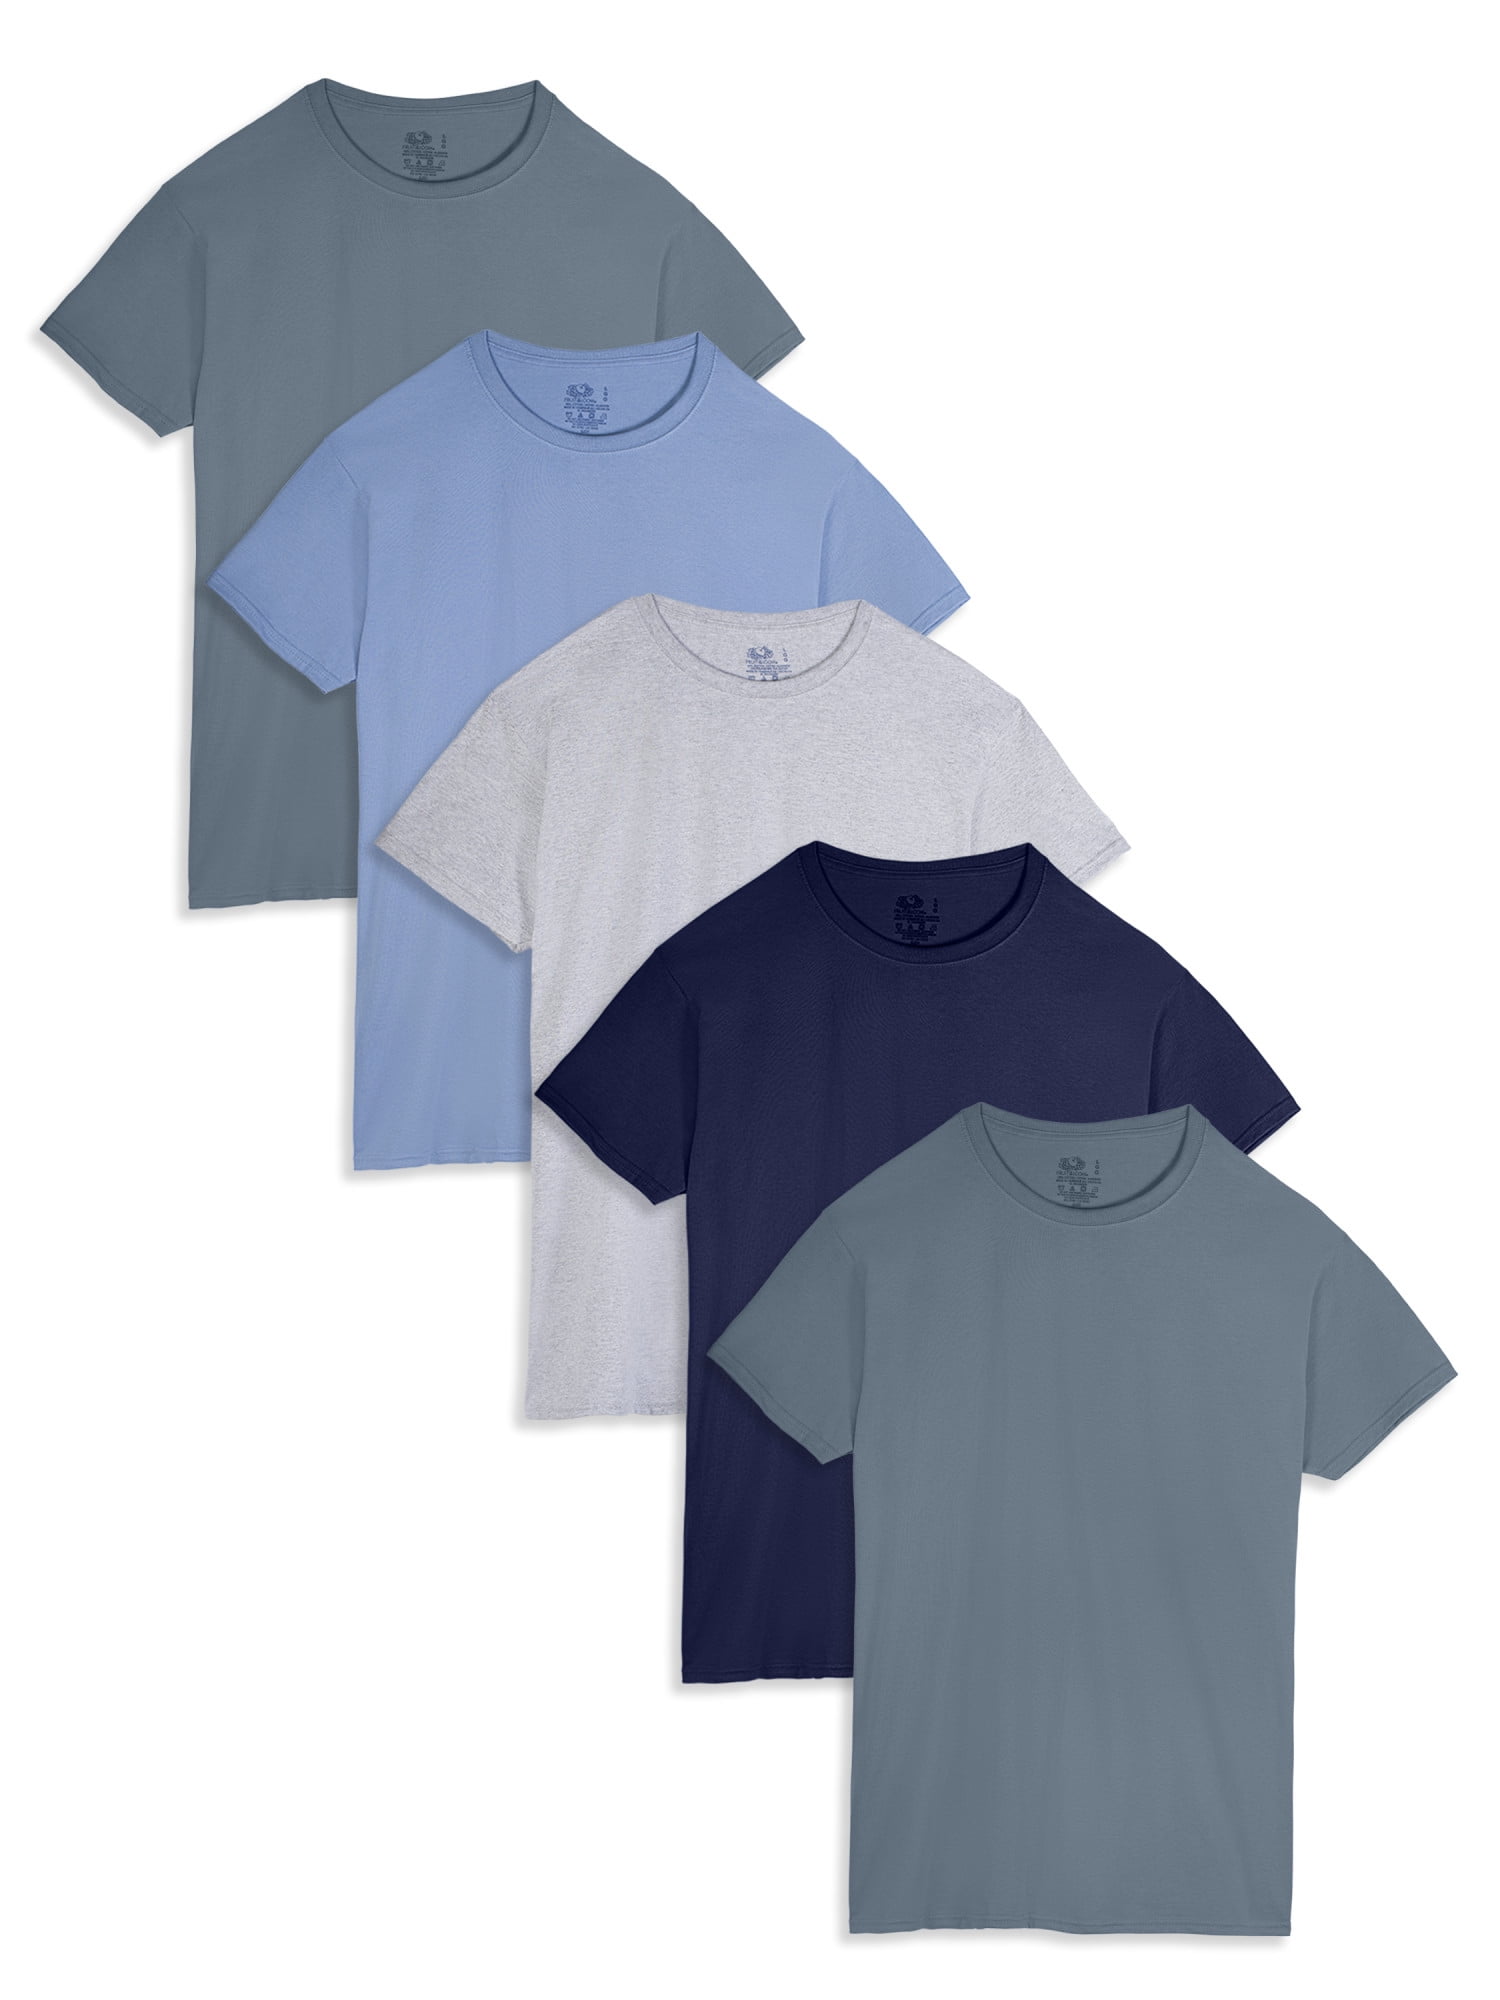 Fruit of the Loom Mens 6 Pack V-Neck T-Shirt 3 Ath Heather // 3 Charcoal XXL